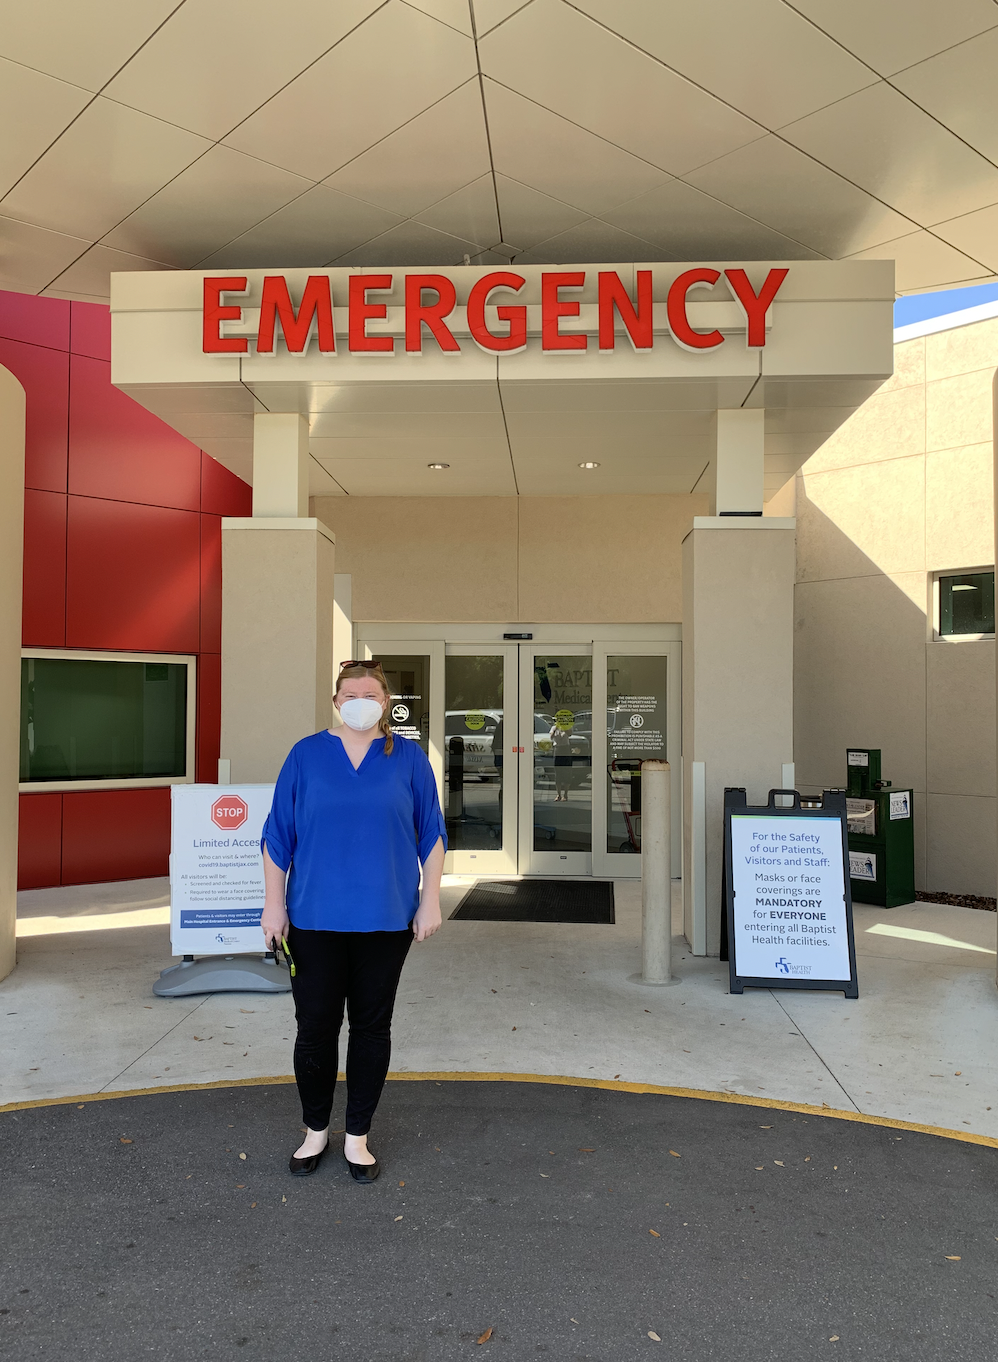 Paige standing outside of the hospital emergency room where she receives referrals from